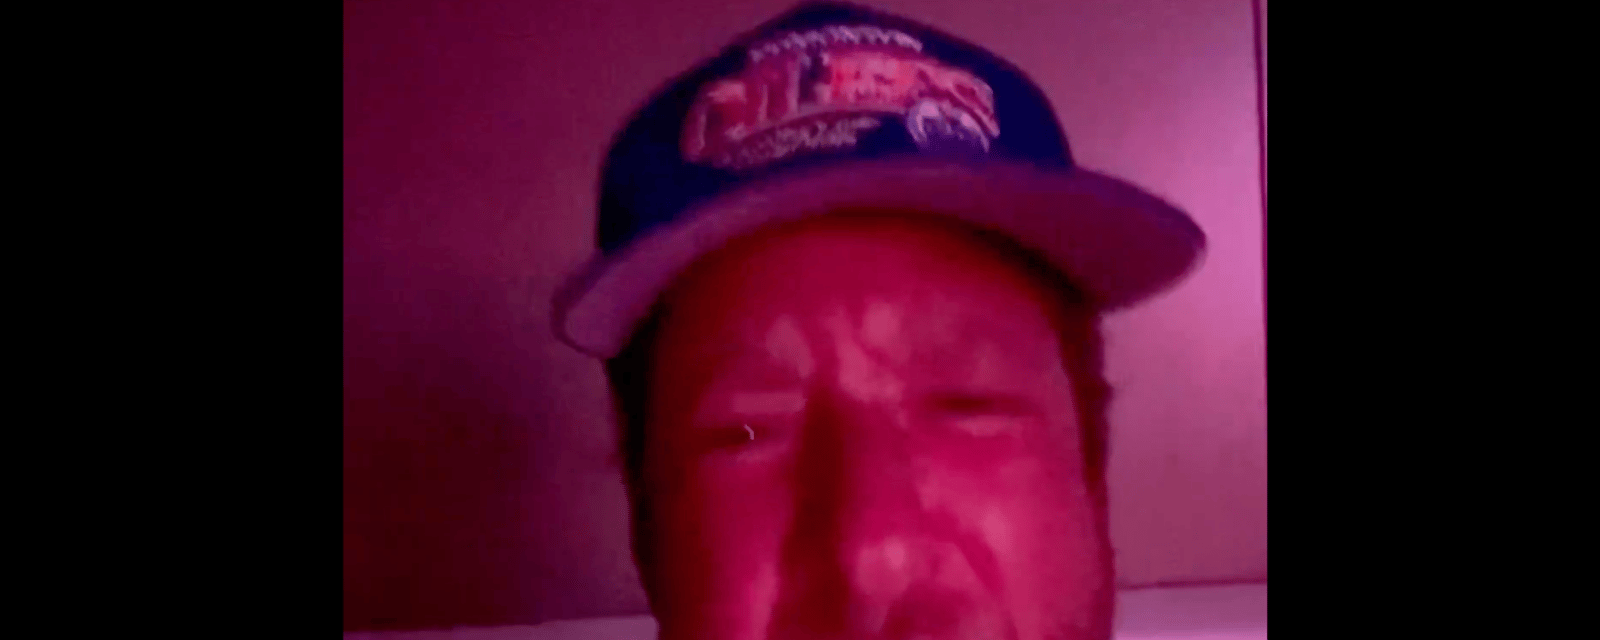 David Portnoy's emotional reaction to Oilers victory goes viral